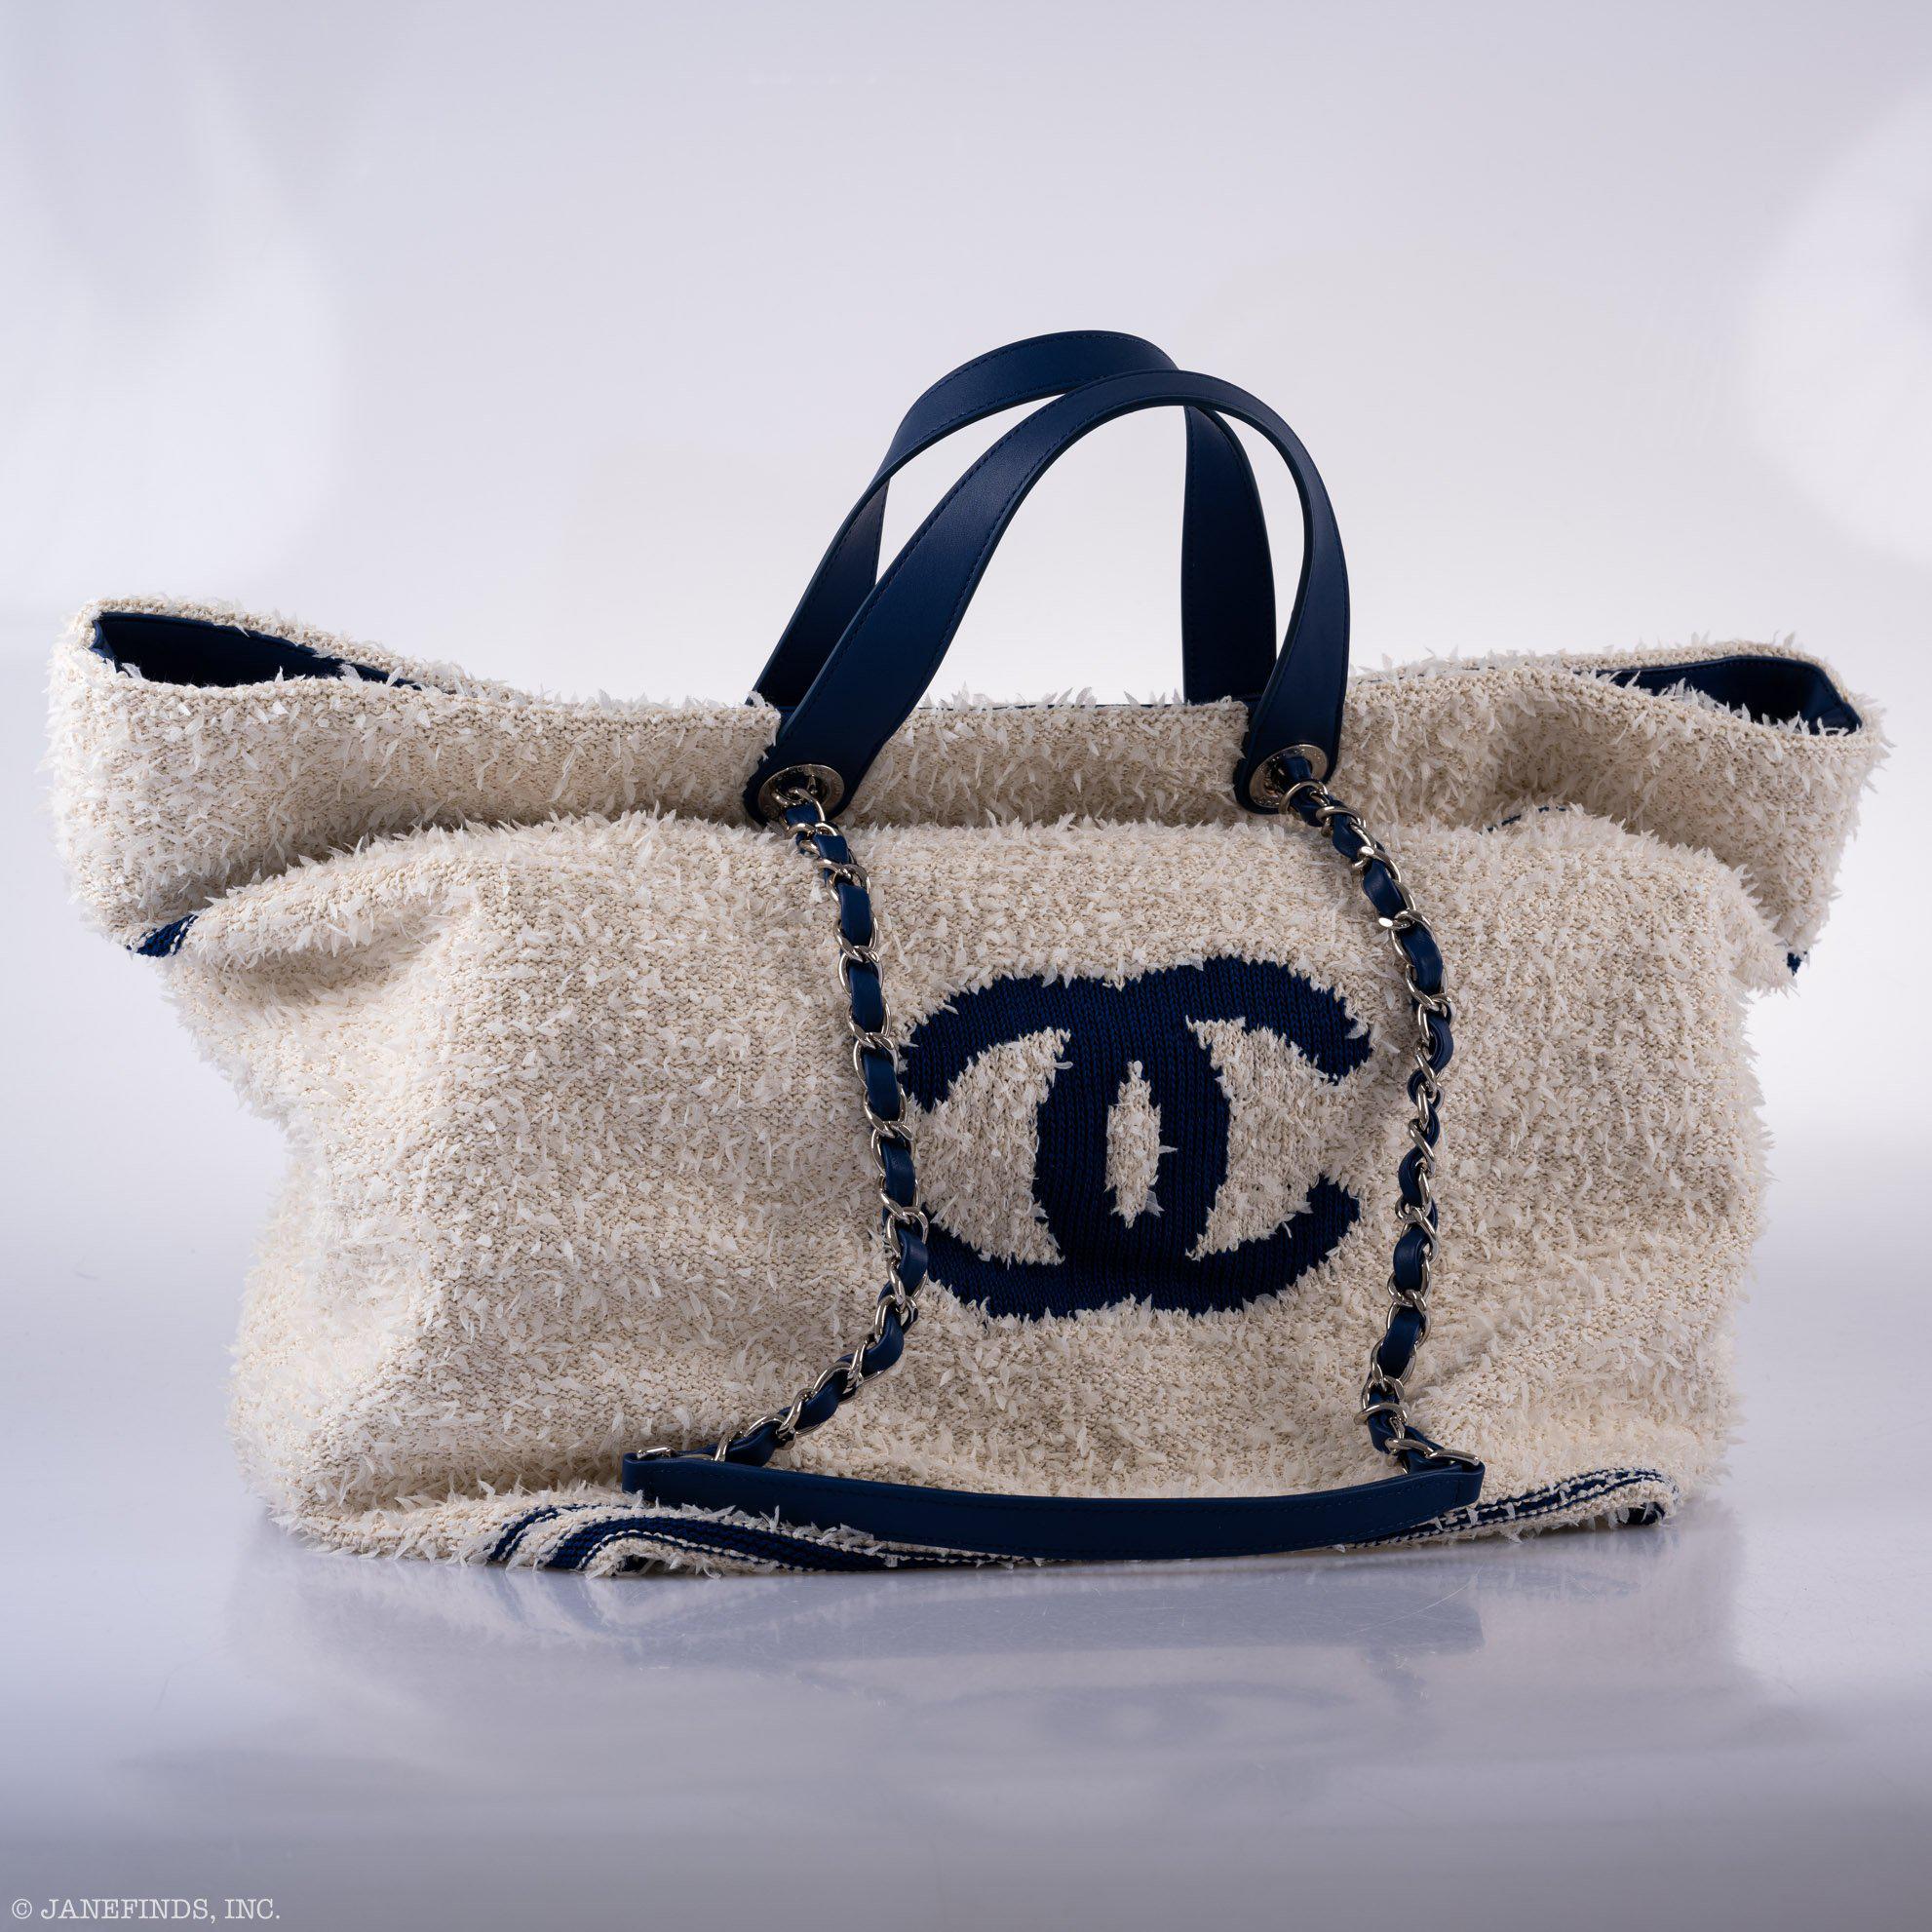 Chanel Venise Biarritz CC Tote XL White and Navy Canvas